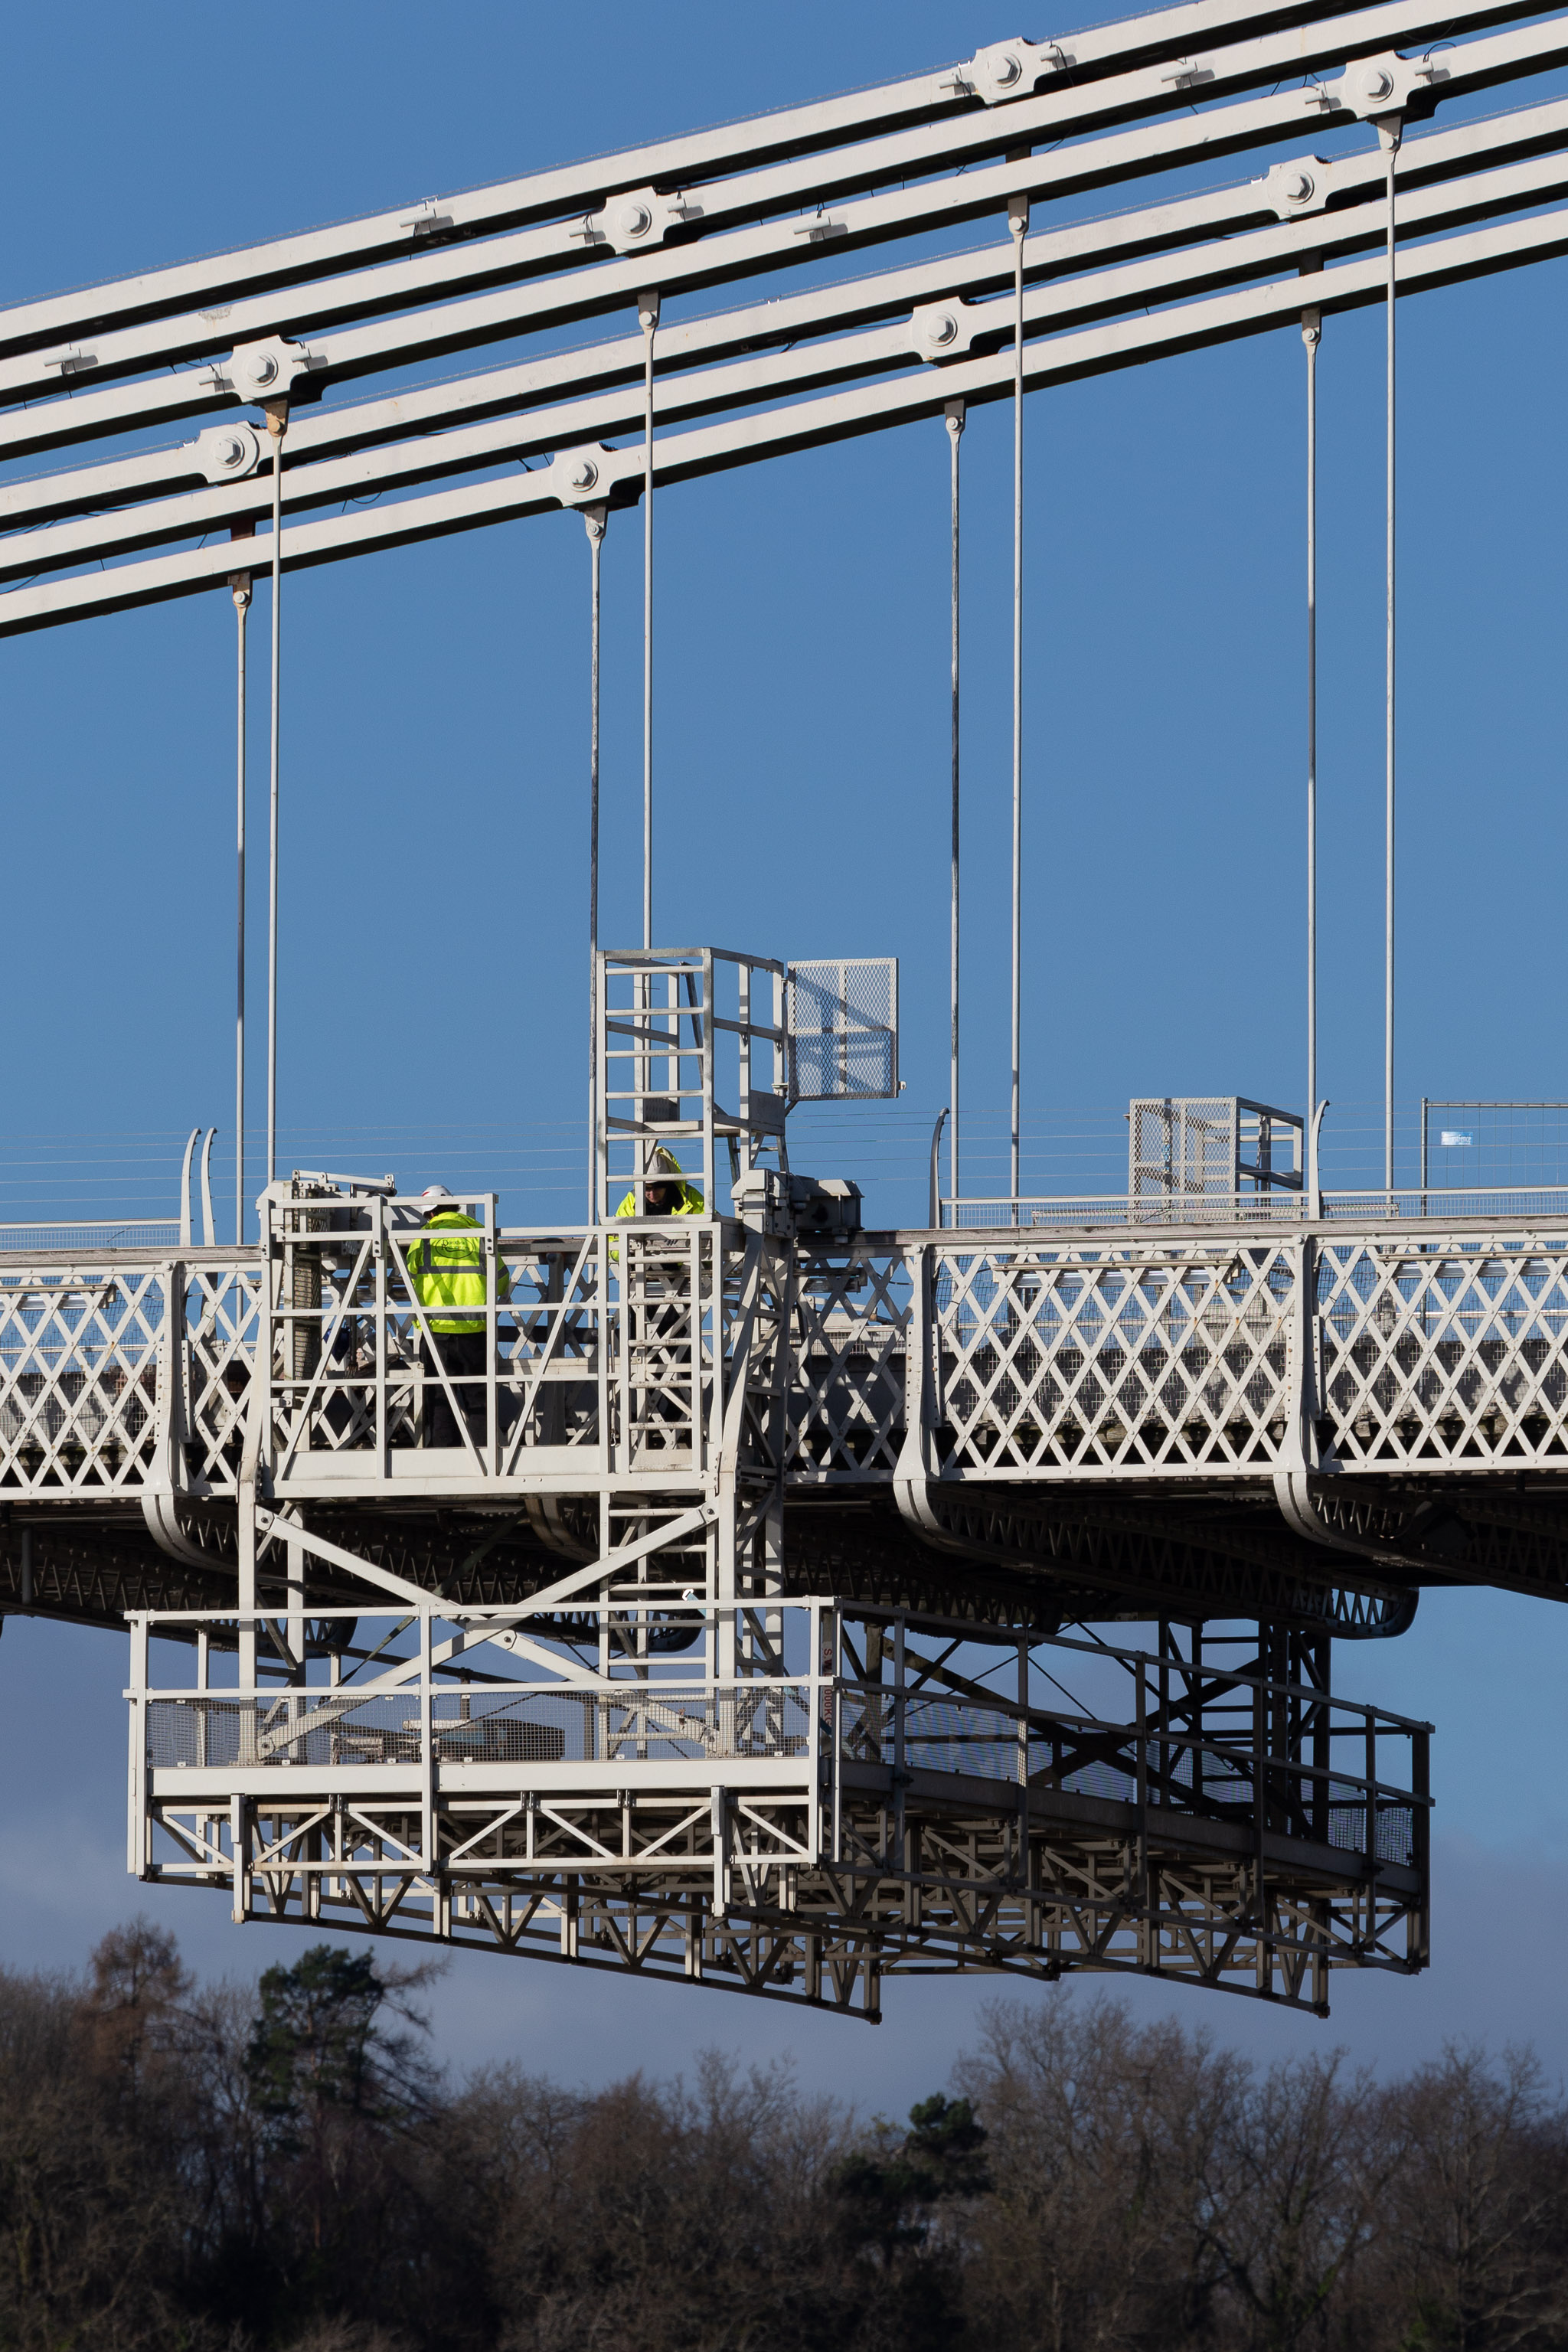 Men at Work
If I'd really considered it, the fact that there was a bloke in high vis standing on the bit of the bridge I wanted to take a photograph of might h...